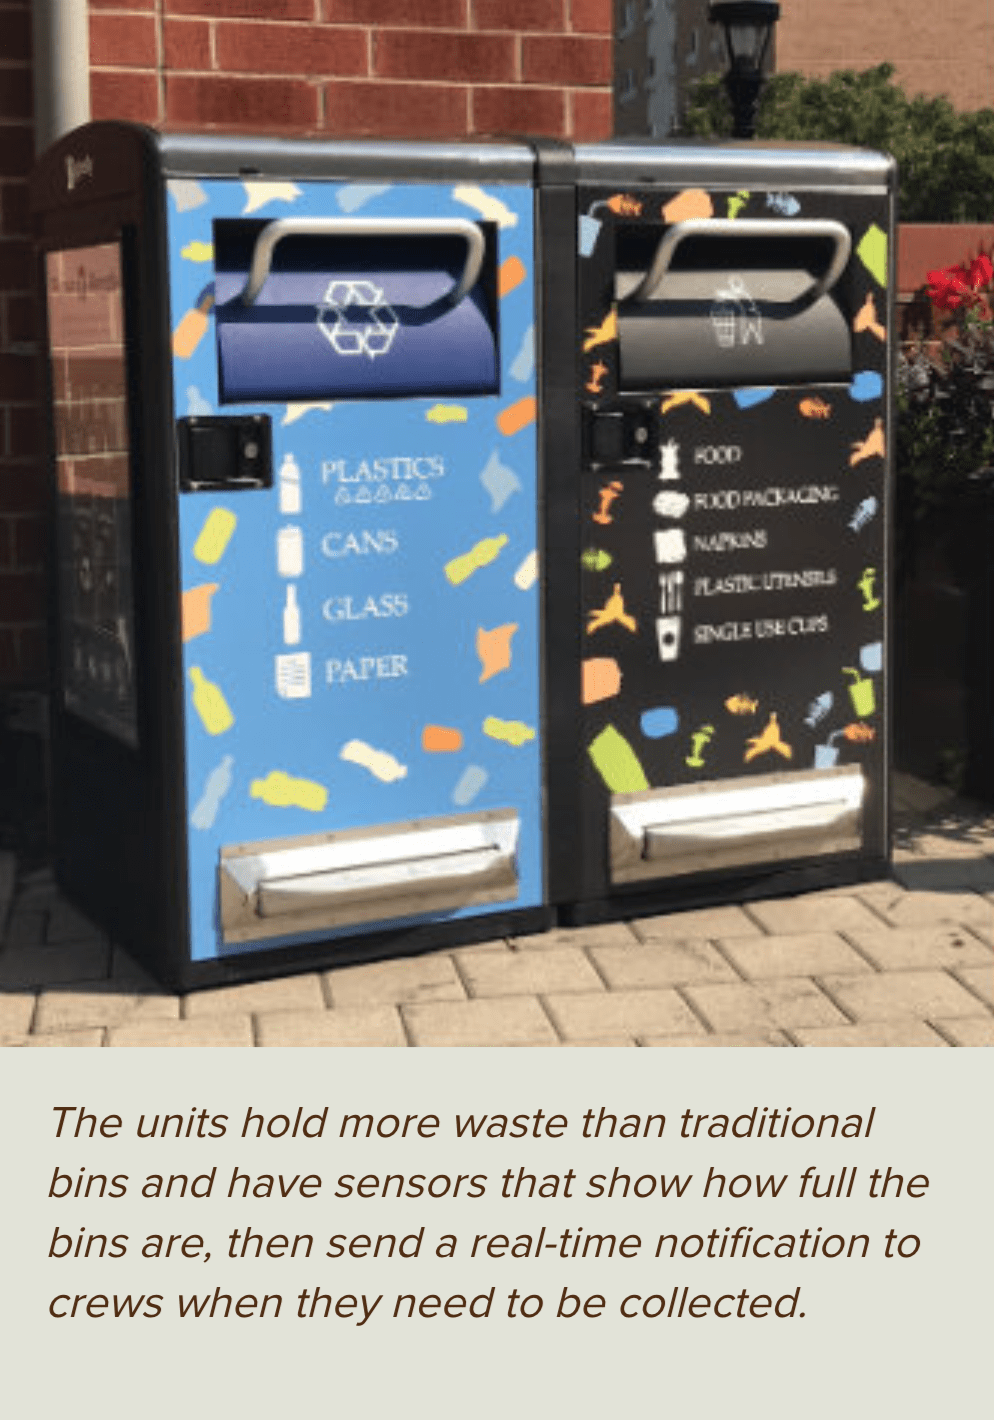 Bigbelly at Lehigh - The units hold more waste than traditional bins and have sensors that show how full the bins are, then send a real-time notification to crews when they need to be collected.